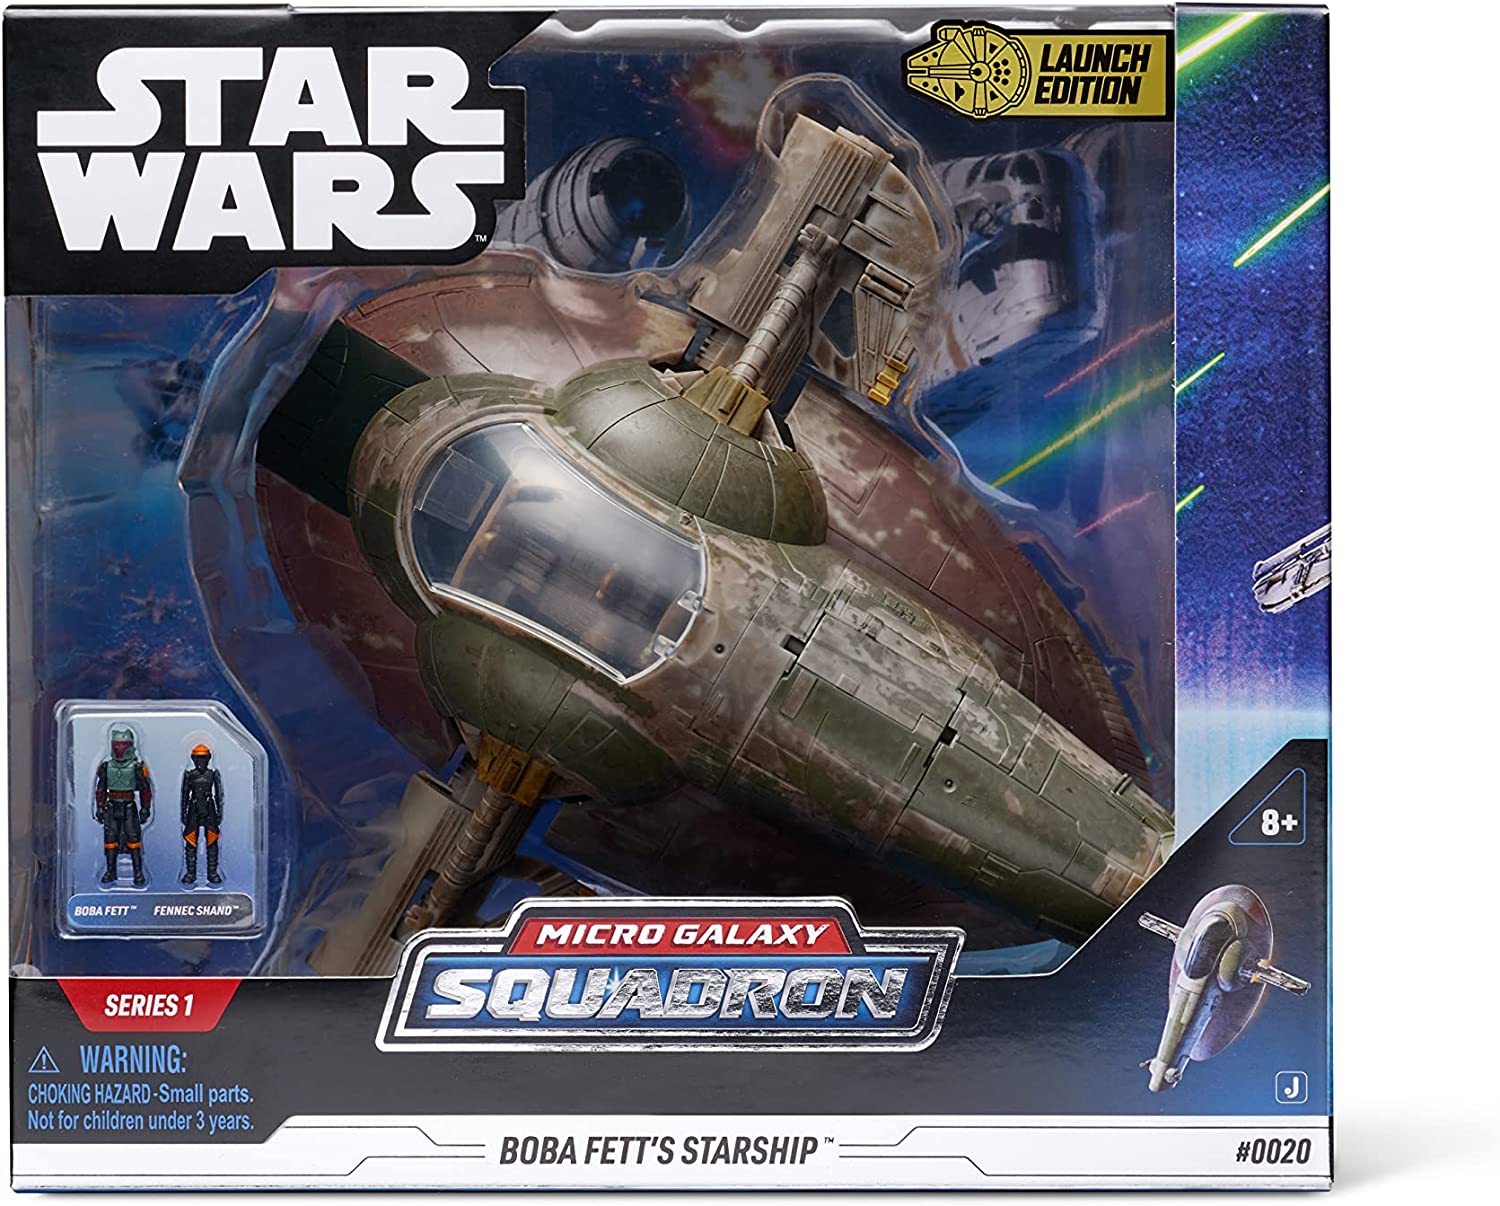 Star Wars Micro Galaxy Squadron Boba Fett’s Starship - 7-Inch Starship Class Vehicle with 1-Inch Boba Fett and Fennec Shand Micro Figure Accessories - image 5 of 6